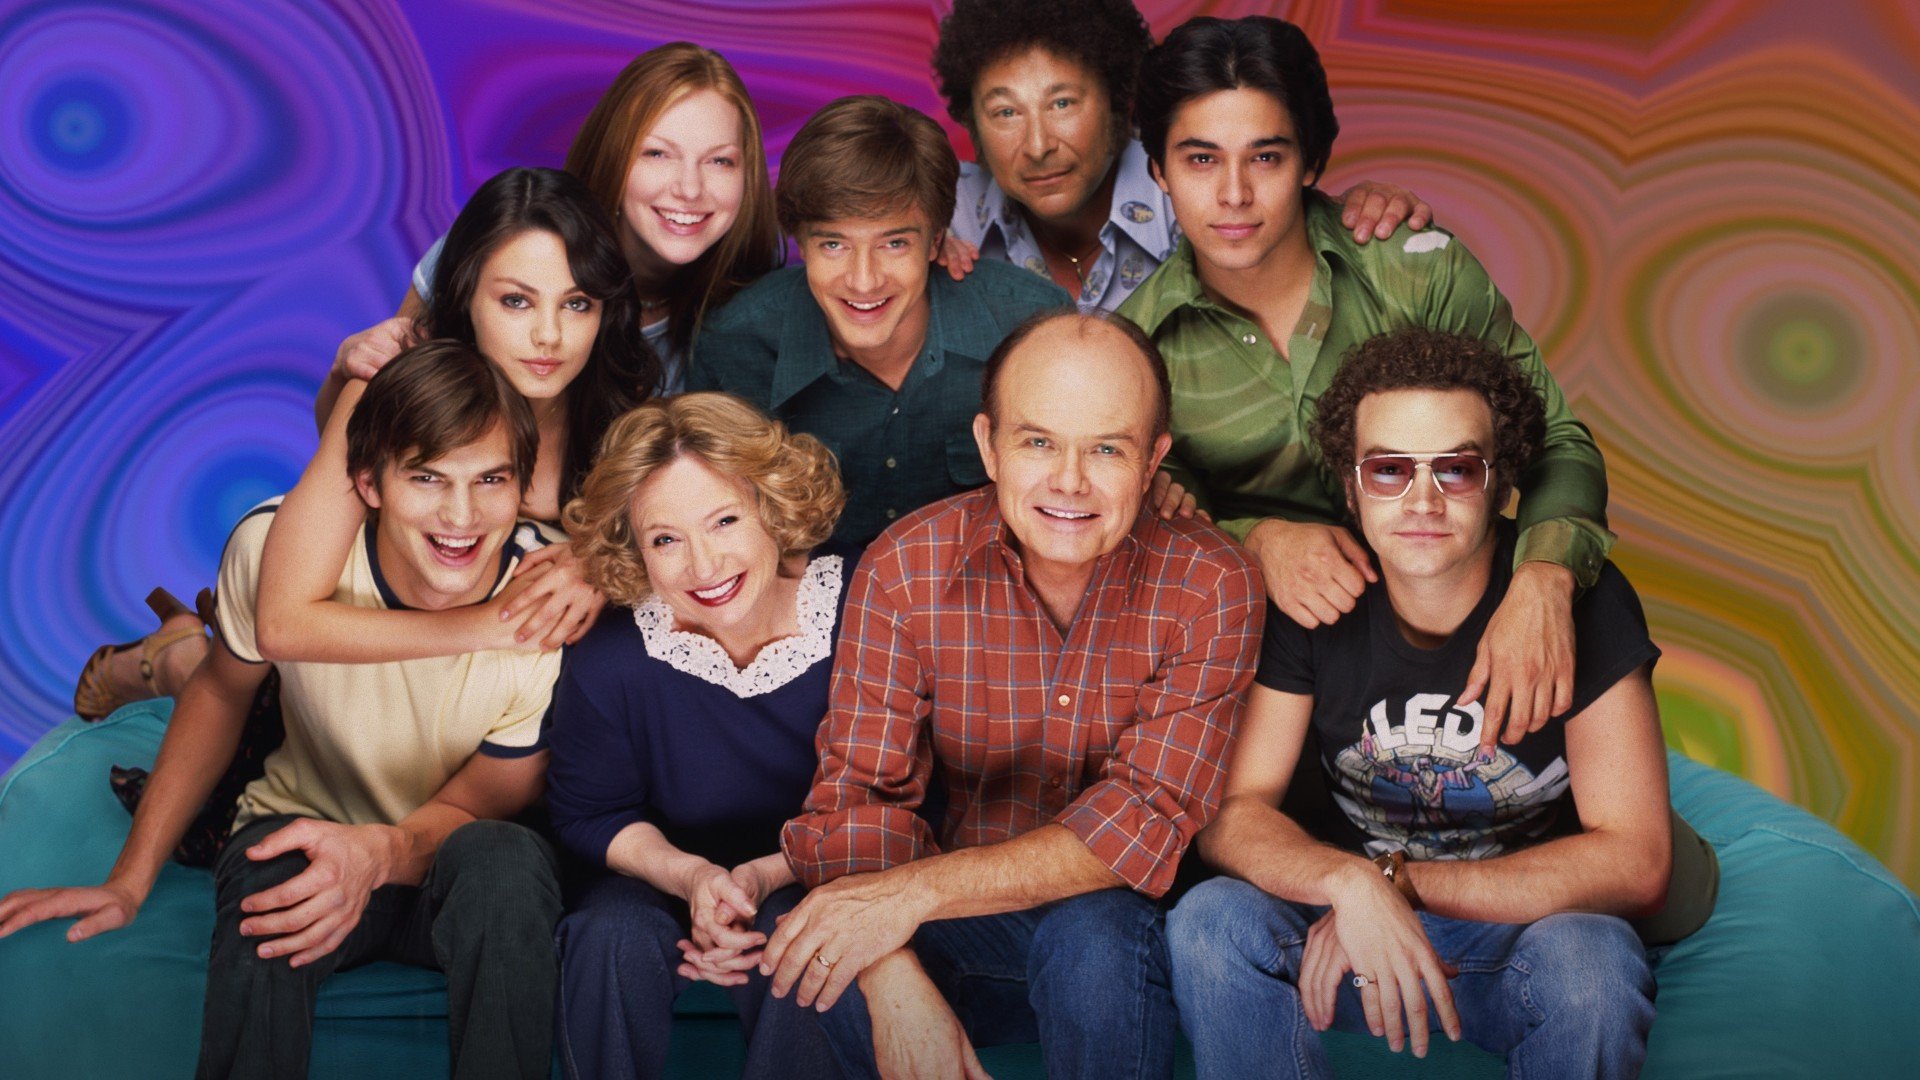 That ’70s Show – IFC